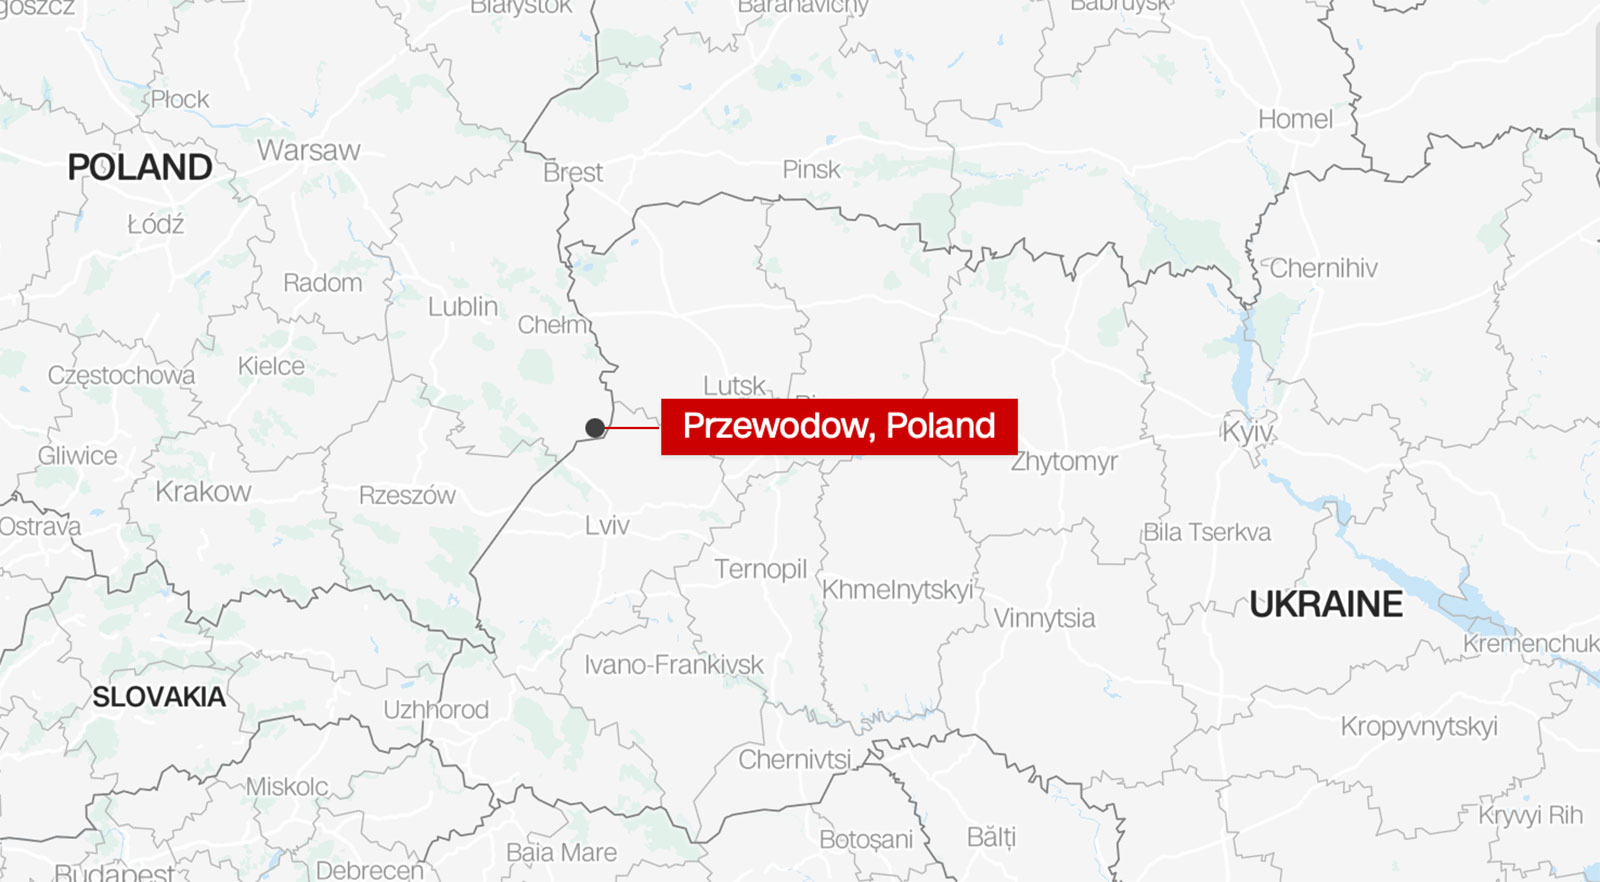 Two missiles or rockets are reported to have hit a farm in Poland, near the town of Przewodow, near the border with Ukraine. 